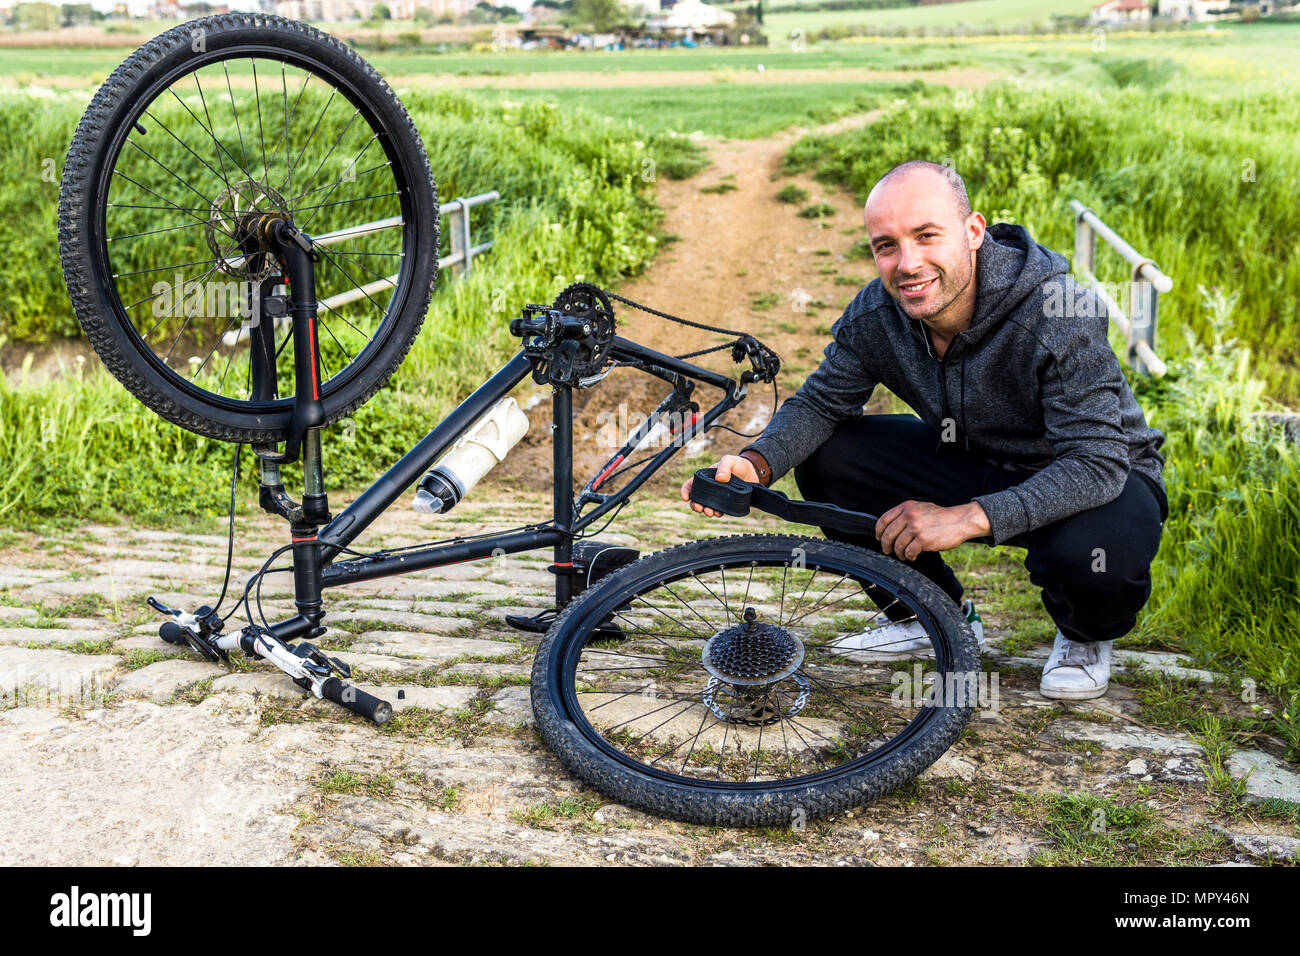 Portrait of man repairing bicycle on field against farm Stock Photo